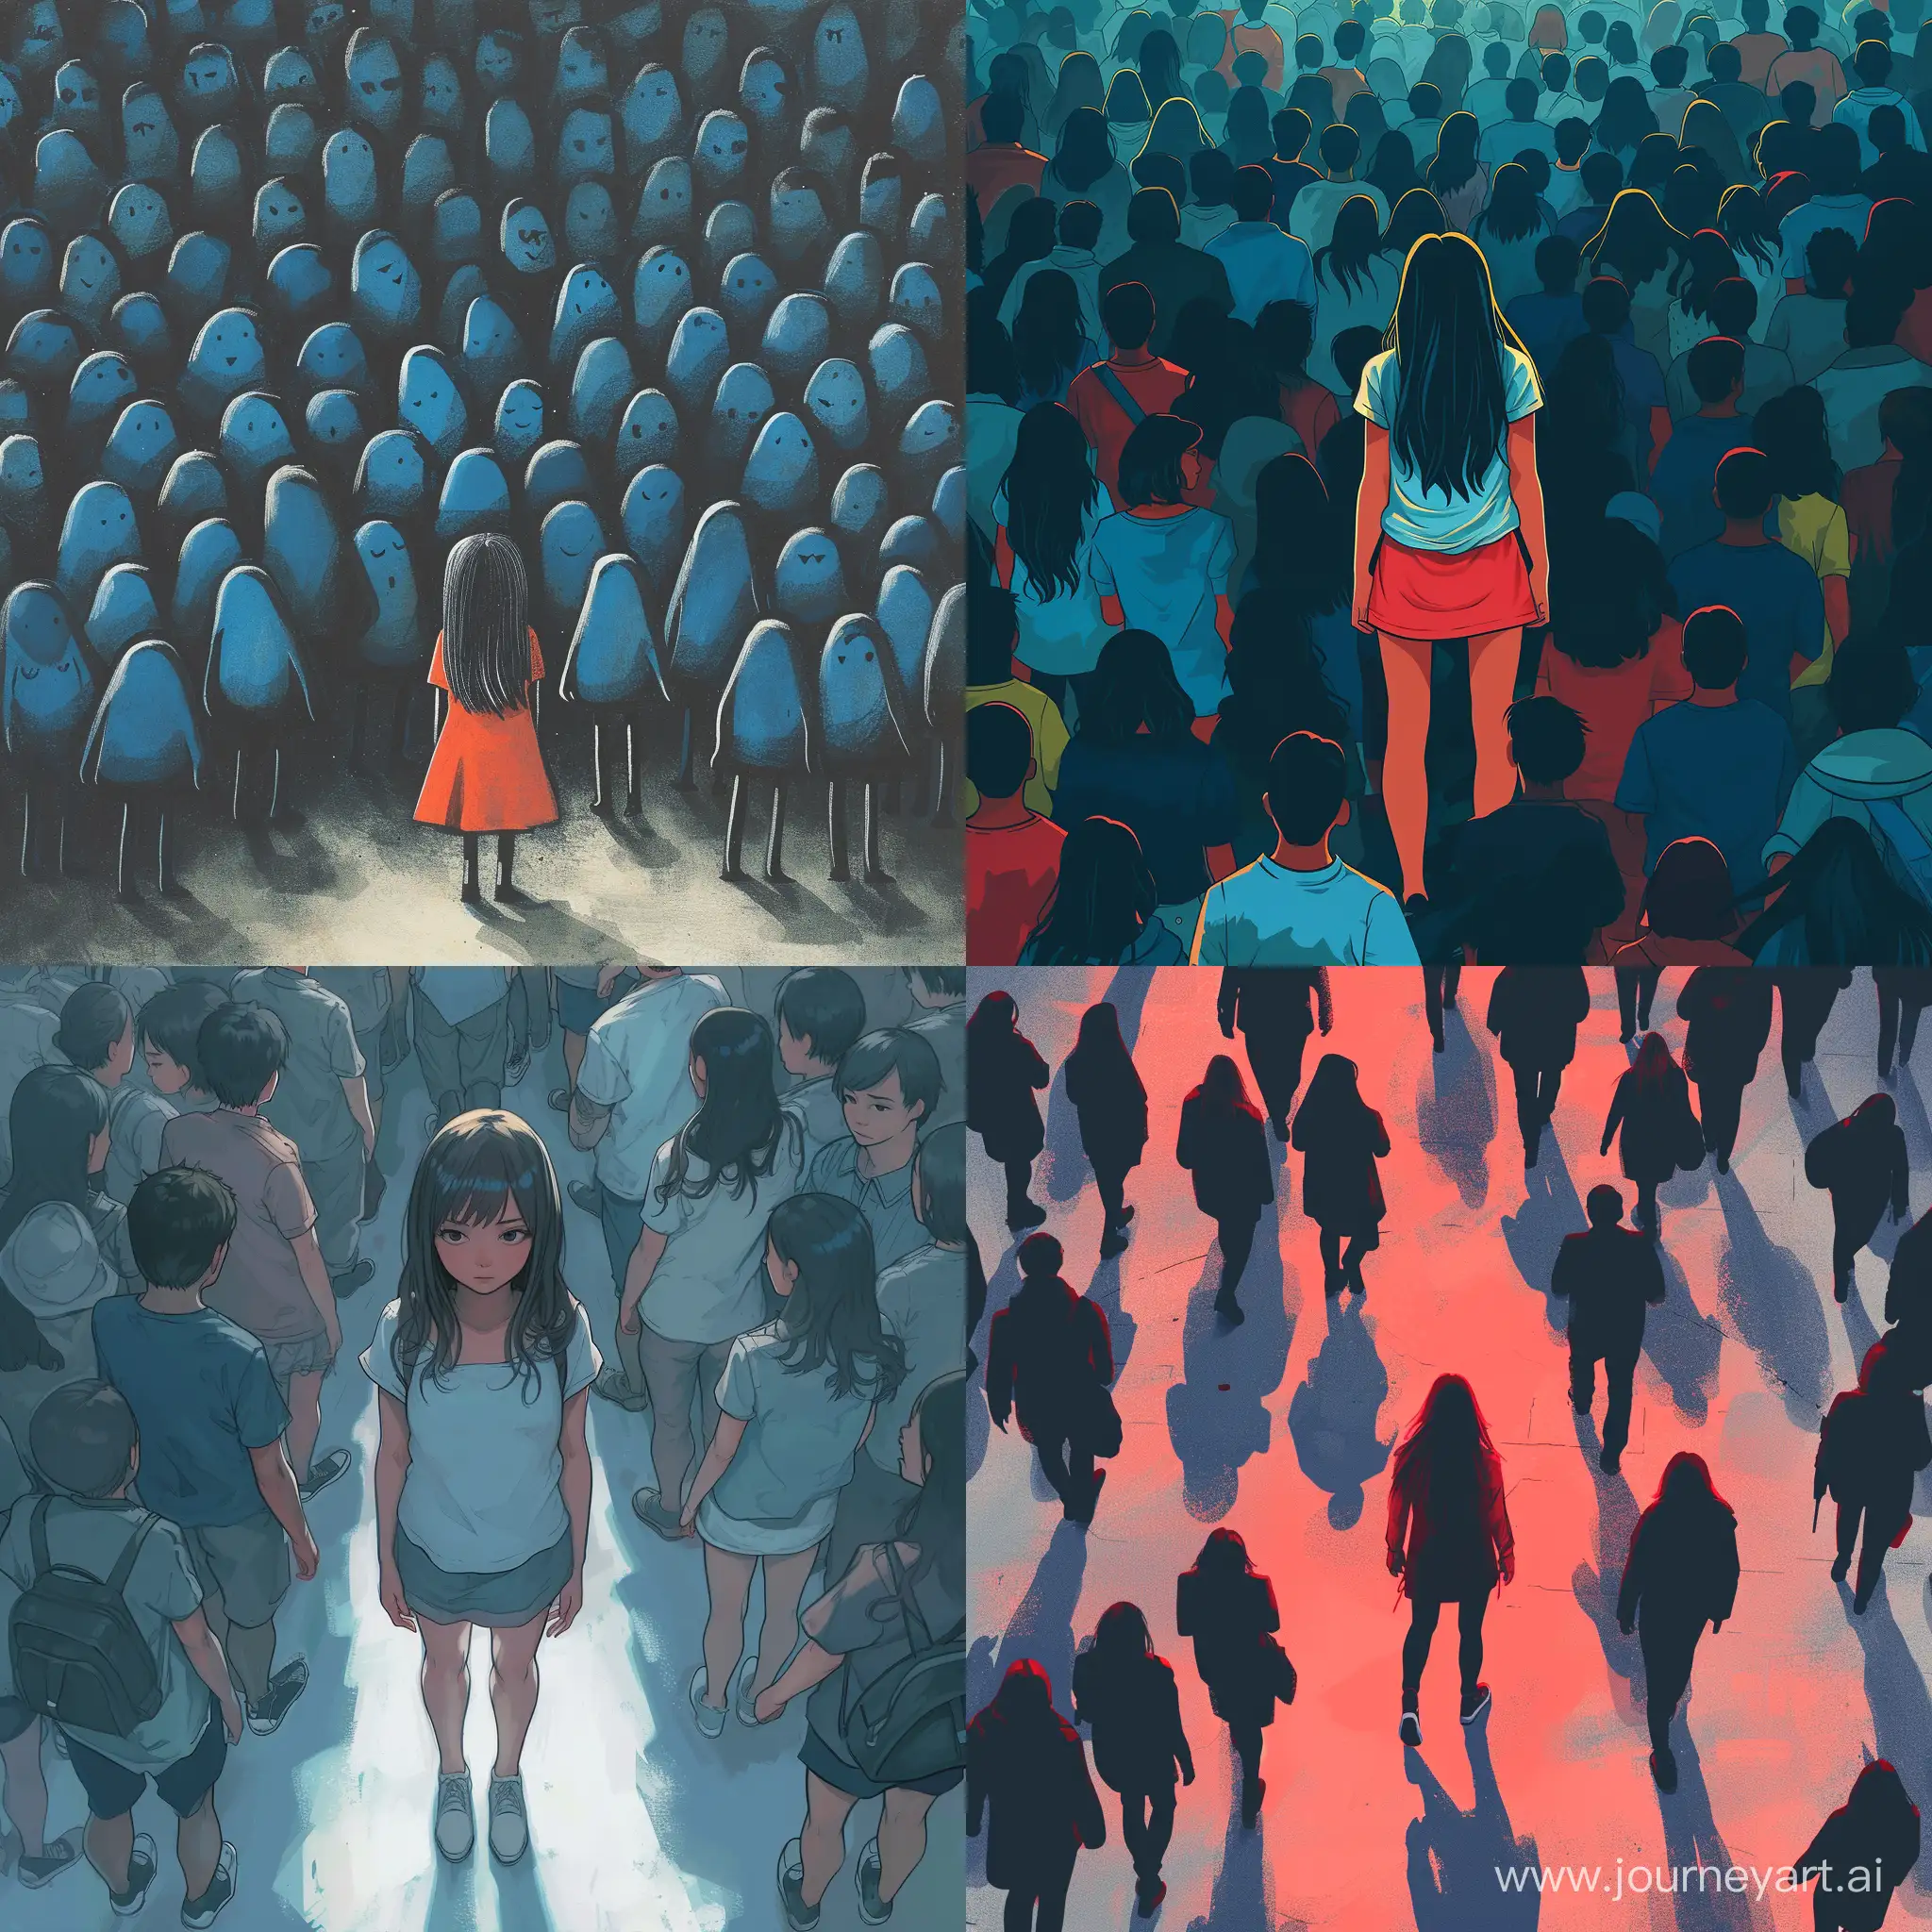 Crowded-Urban-Scene-Young-Girl-Amidst-a-Bustling-Crowd